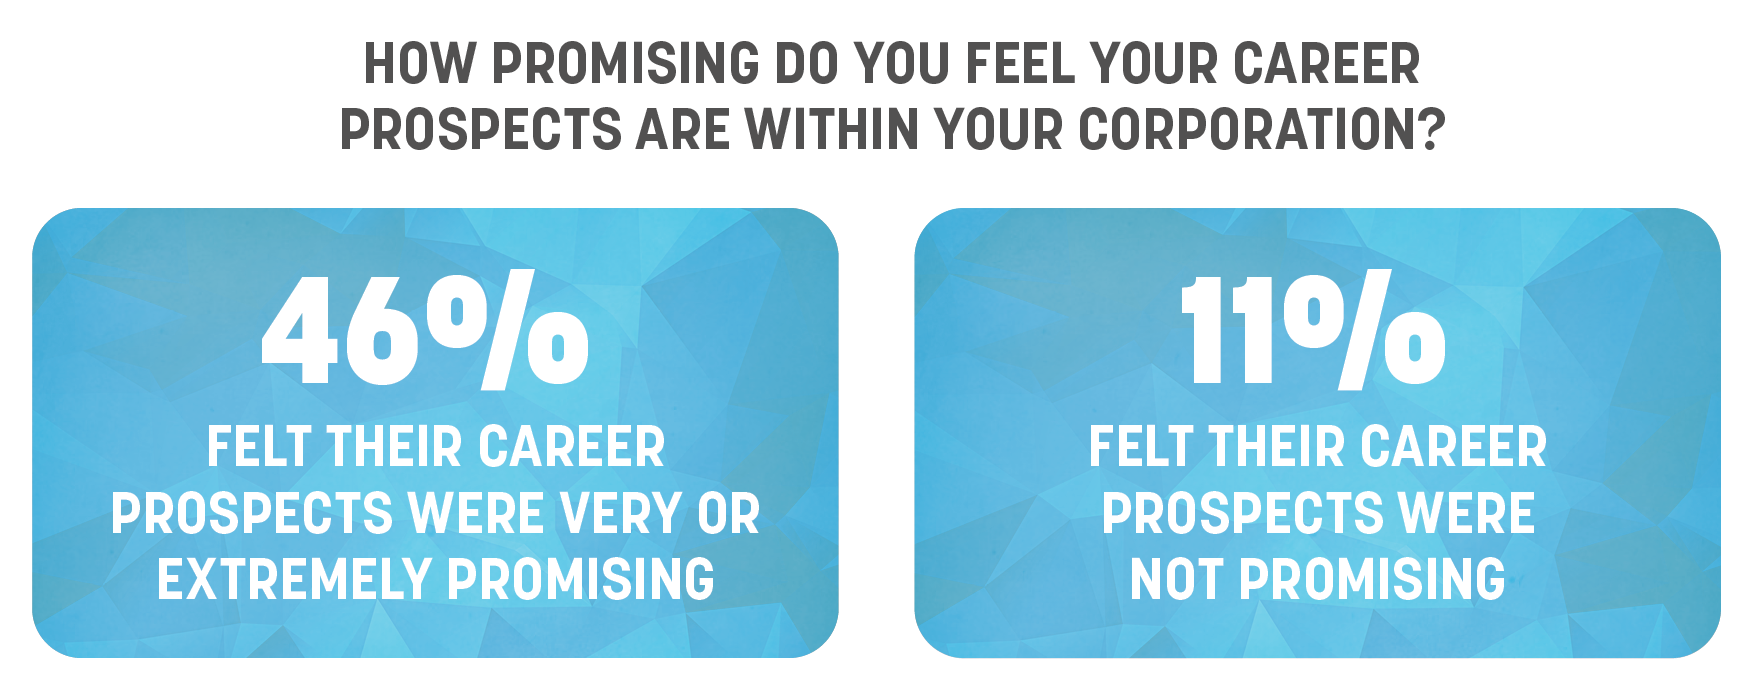 Empow(h)er™ - HOW PROMISING DO YOU FEEL YOUR CAREER  PROSPECTS ARE WITHIN YOUR CORPORATION